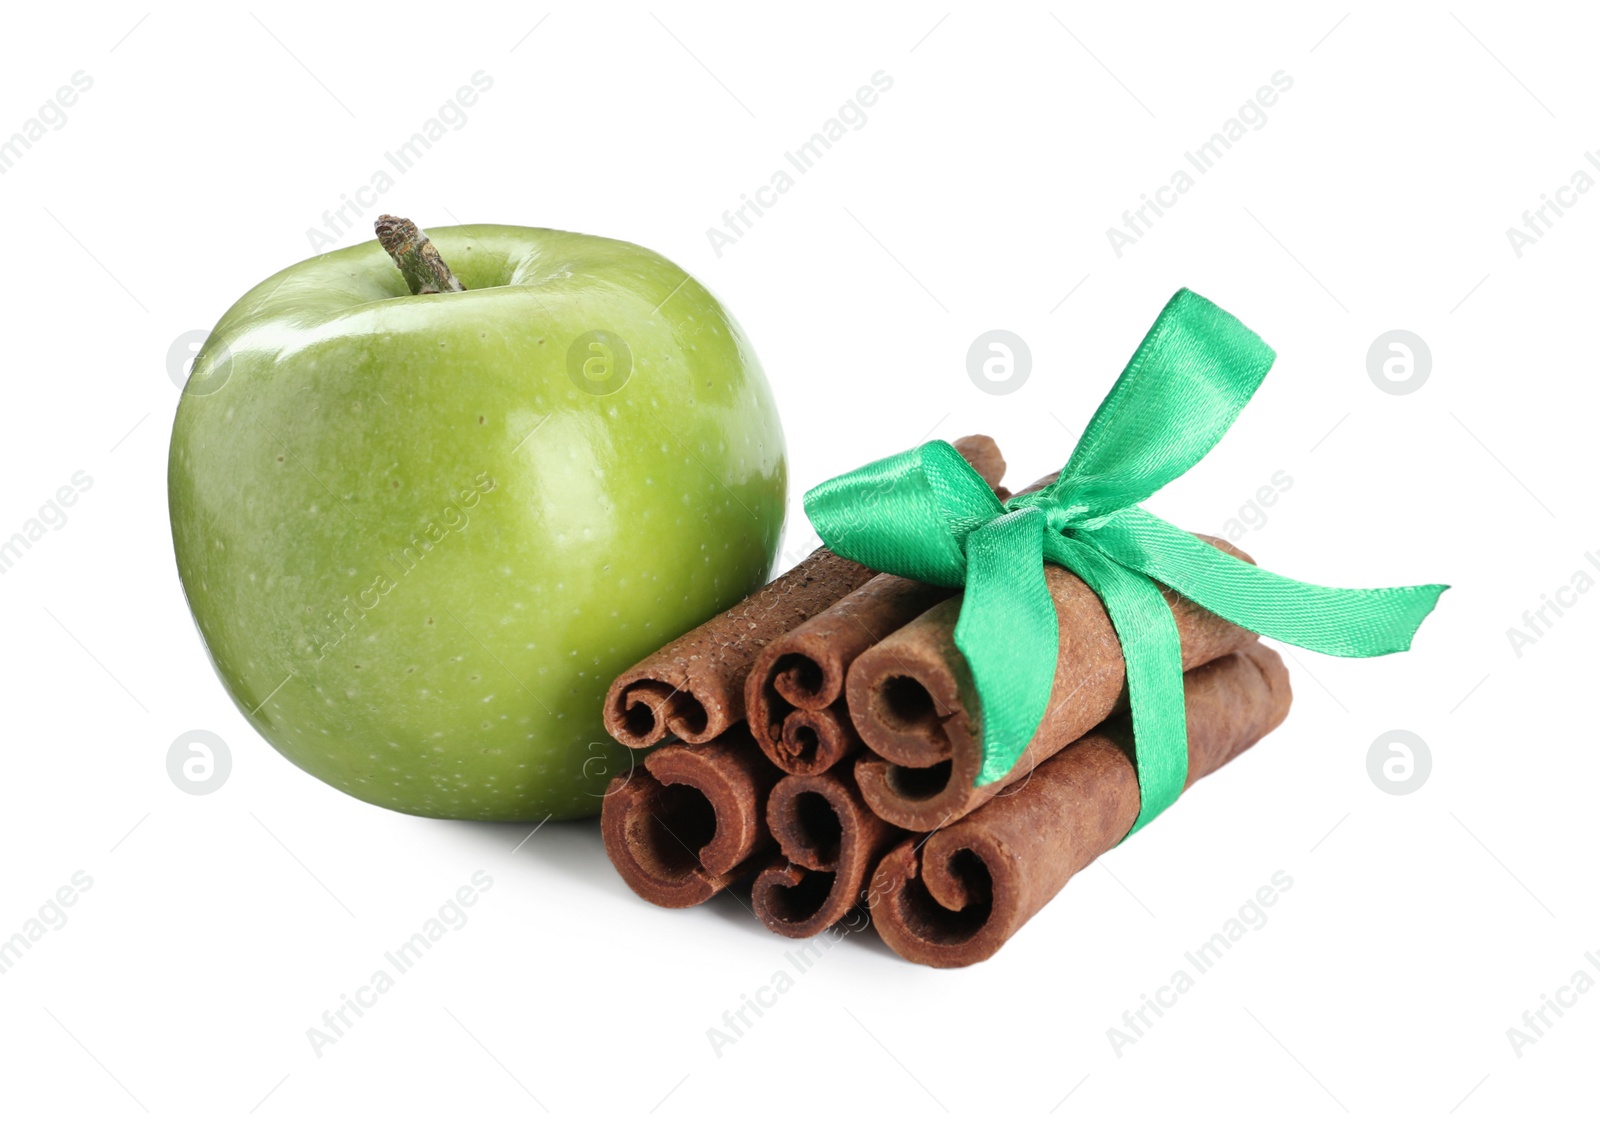 Photo of Cinnamon sticks and green apple on white background